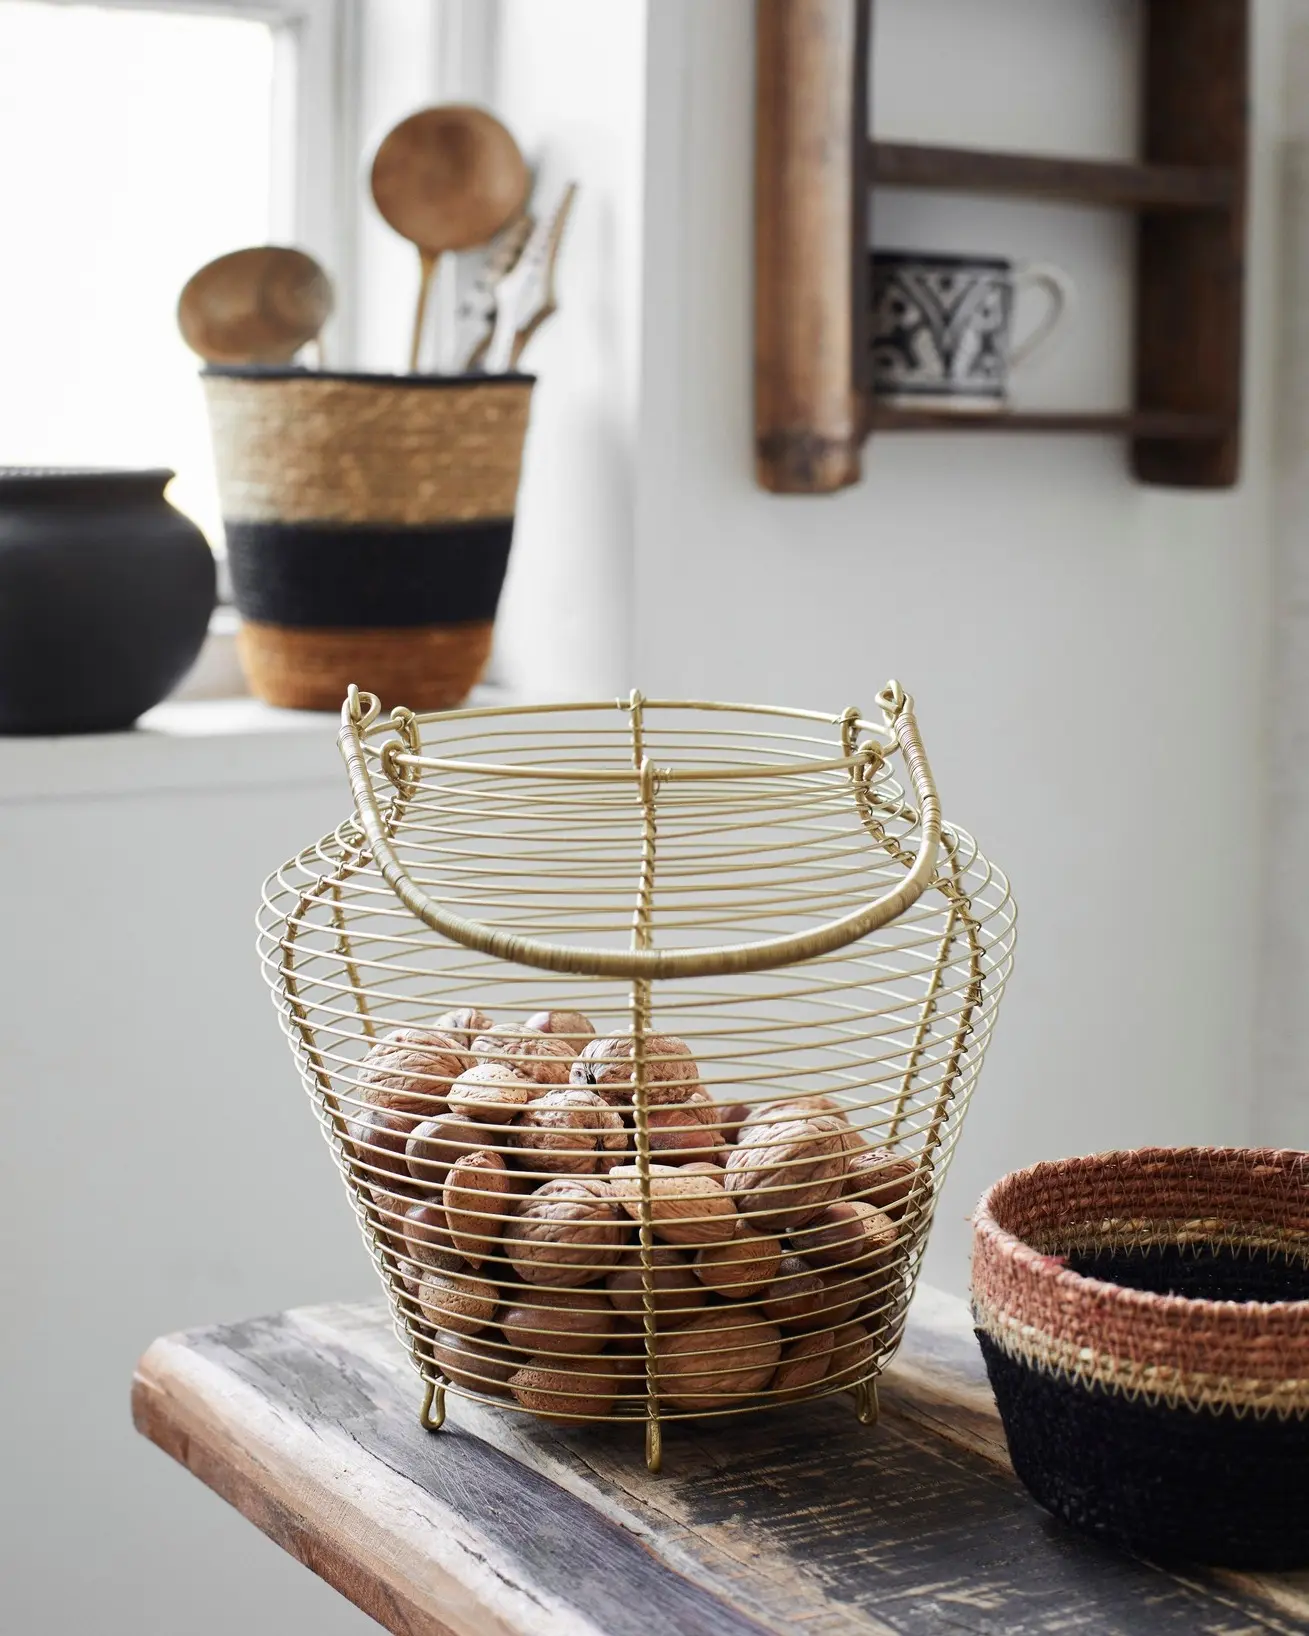 This iron basket with handles makes a perfect container for nuts, fruits and vegetables or other kitchen organization needs.